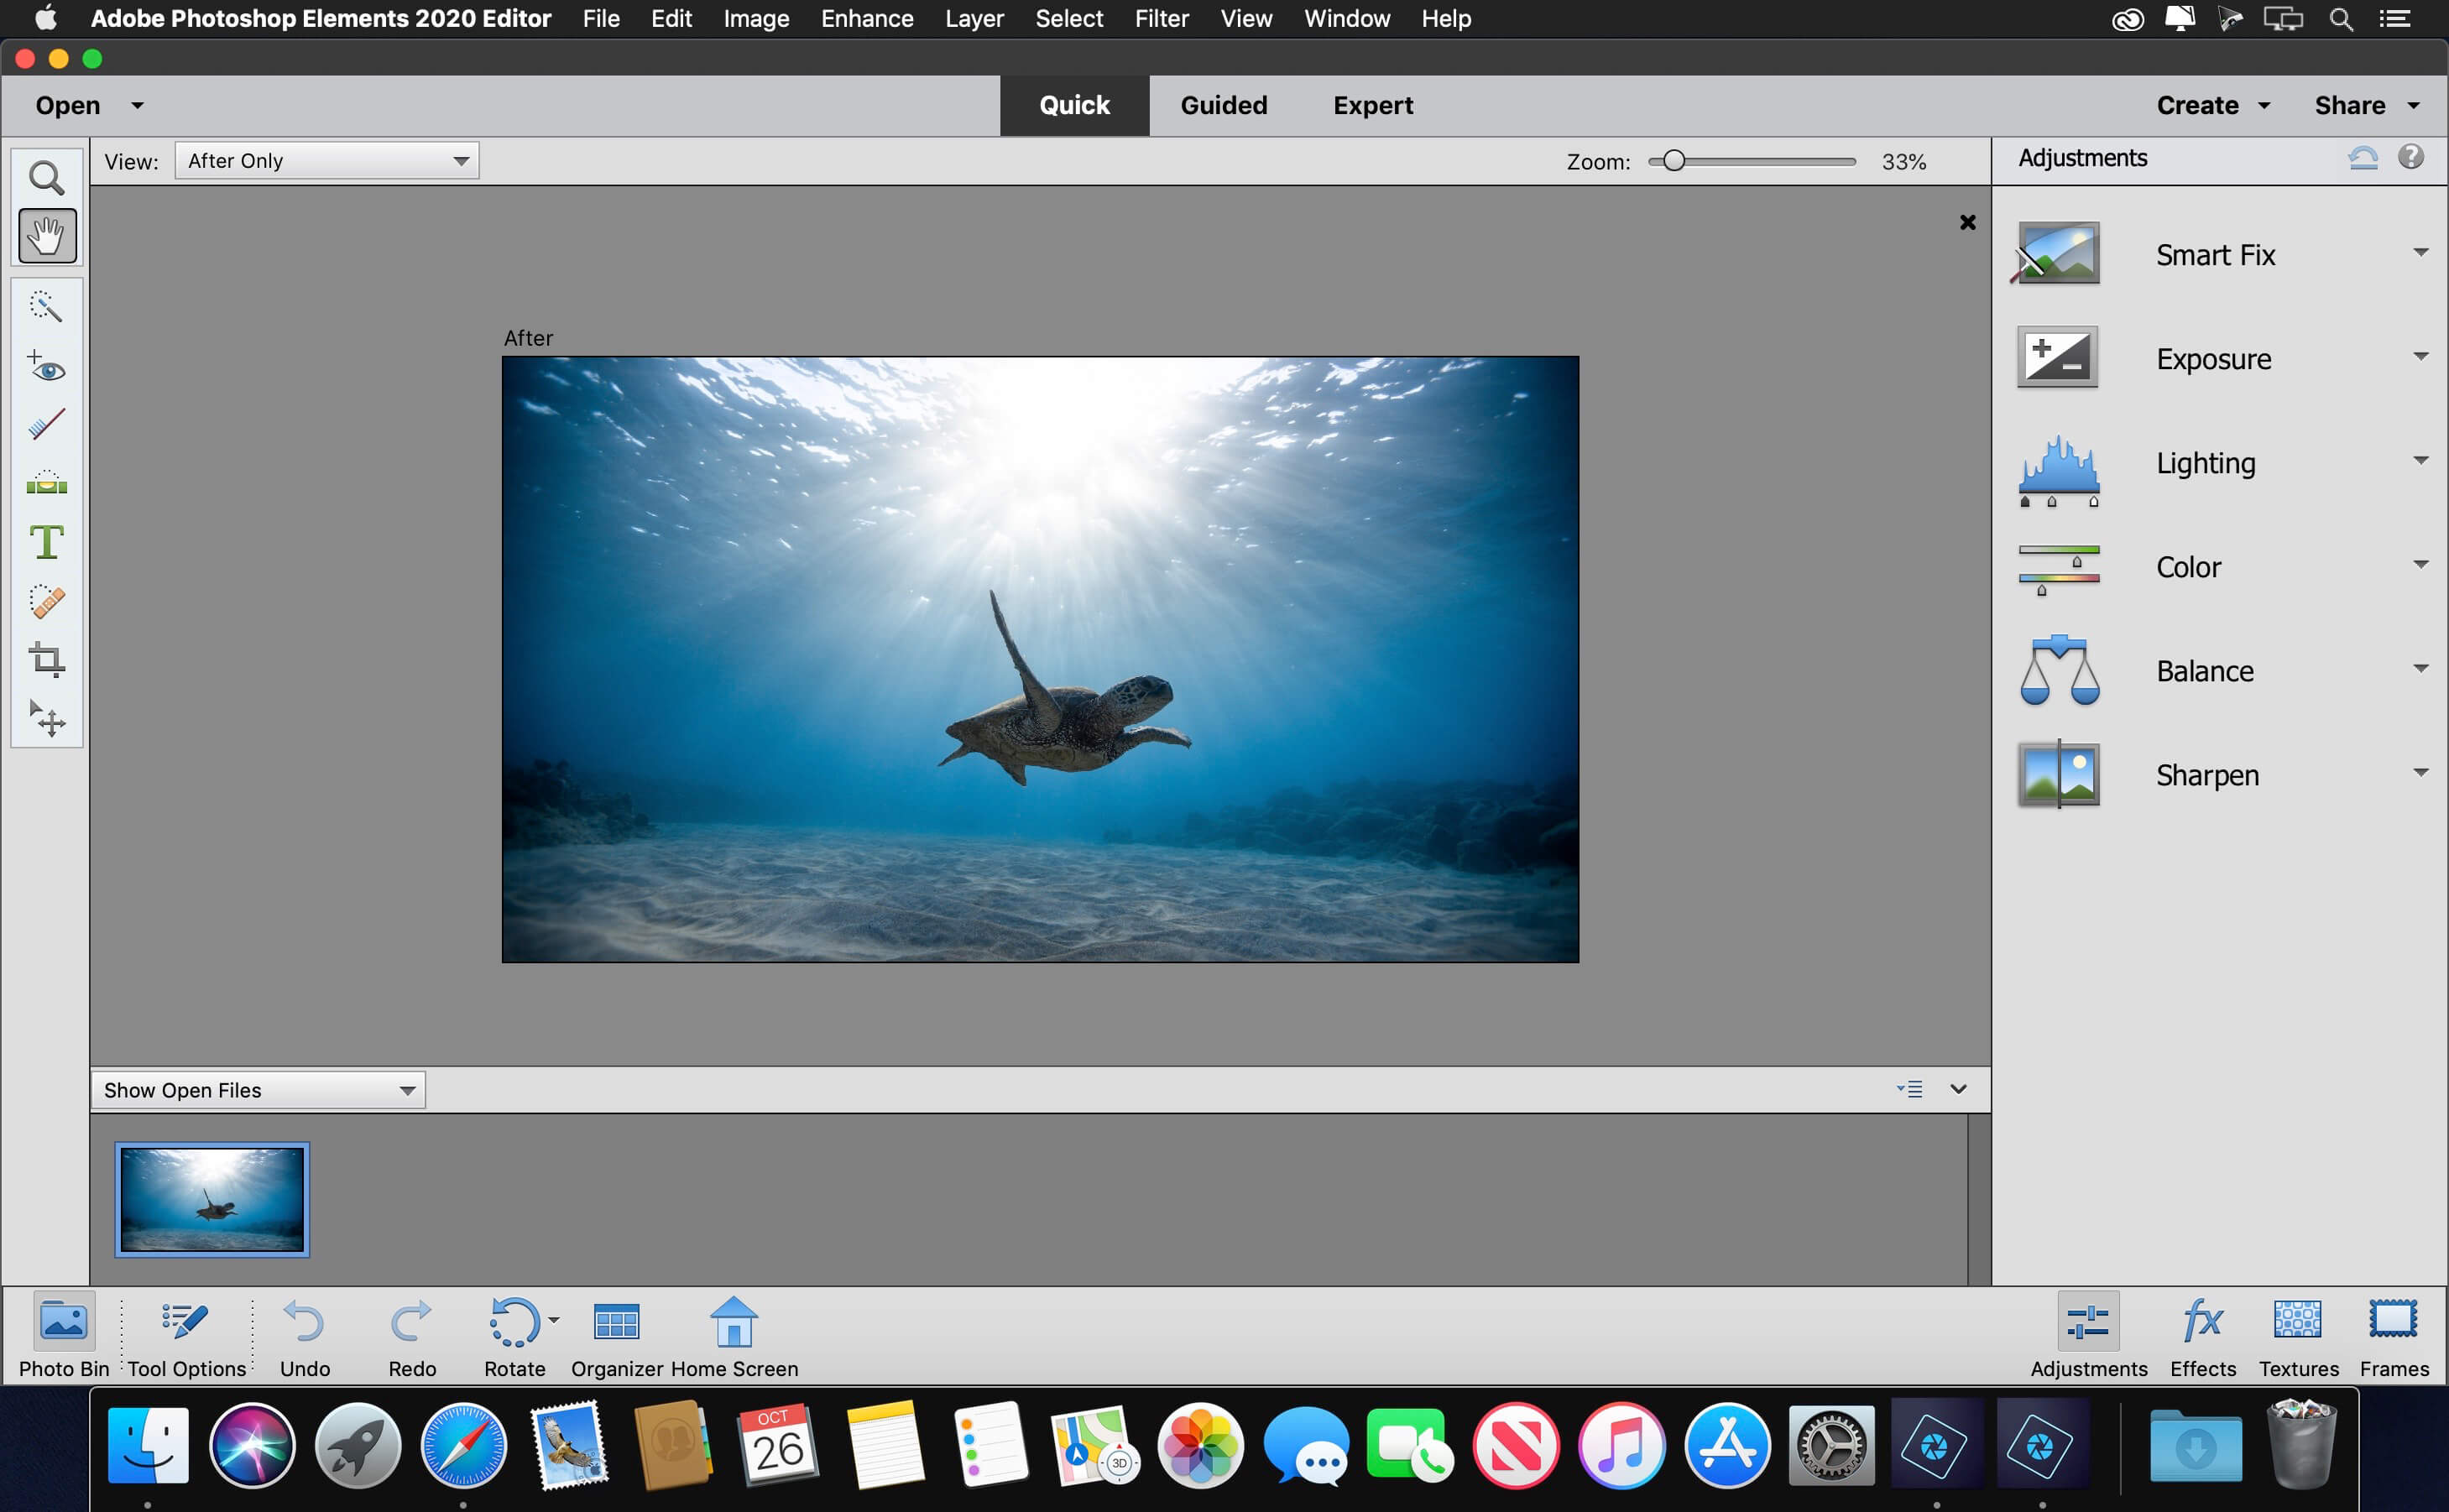 Adobe Photoshop Elements Free For Macos Catalina